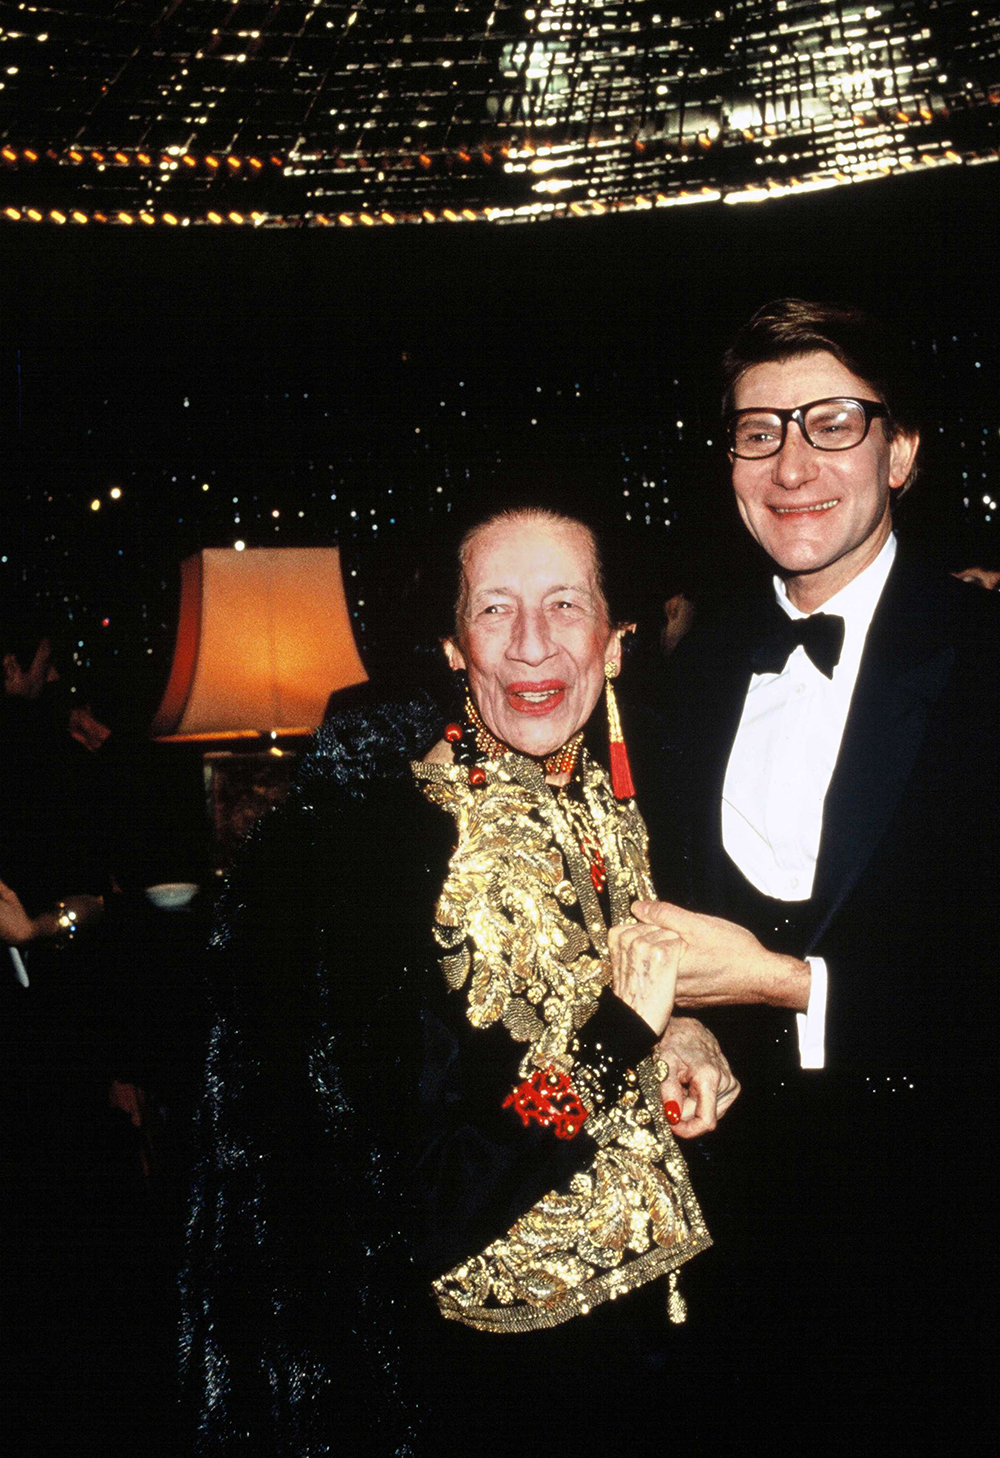 PARIS,FRANCE - NOVEMBER 1982: French fashion designer Yves Saint Laurent with Diana Vreeland, the legendary editor of Harper's Bazaar and Vogue attend the Yves Saint Laurent 20th Anniversary Gala at the Lido Cabaret during November 1982 in in Paris,France. (Photo by Georges DeKeerle/Getty Images)